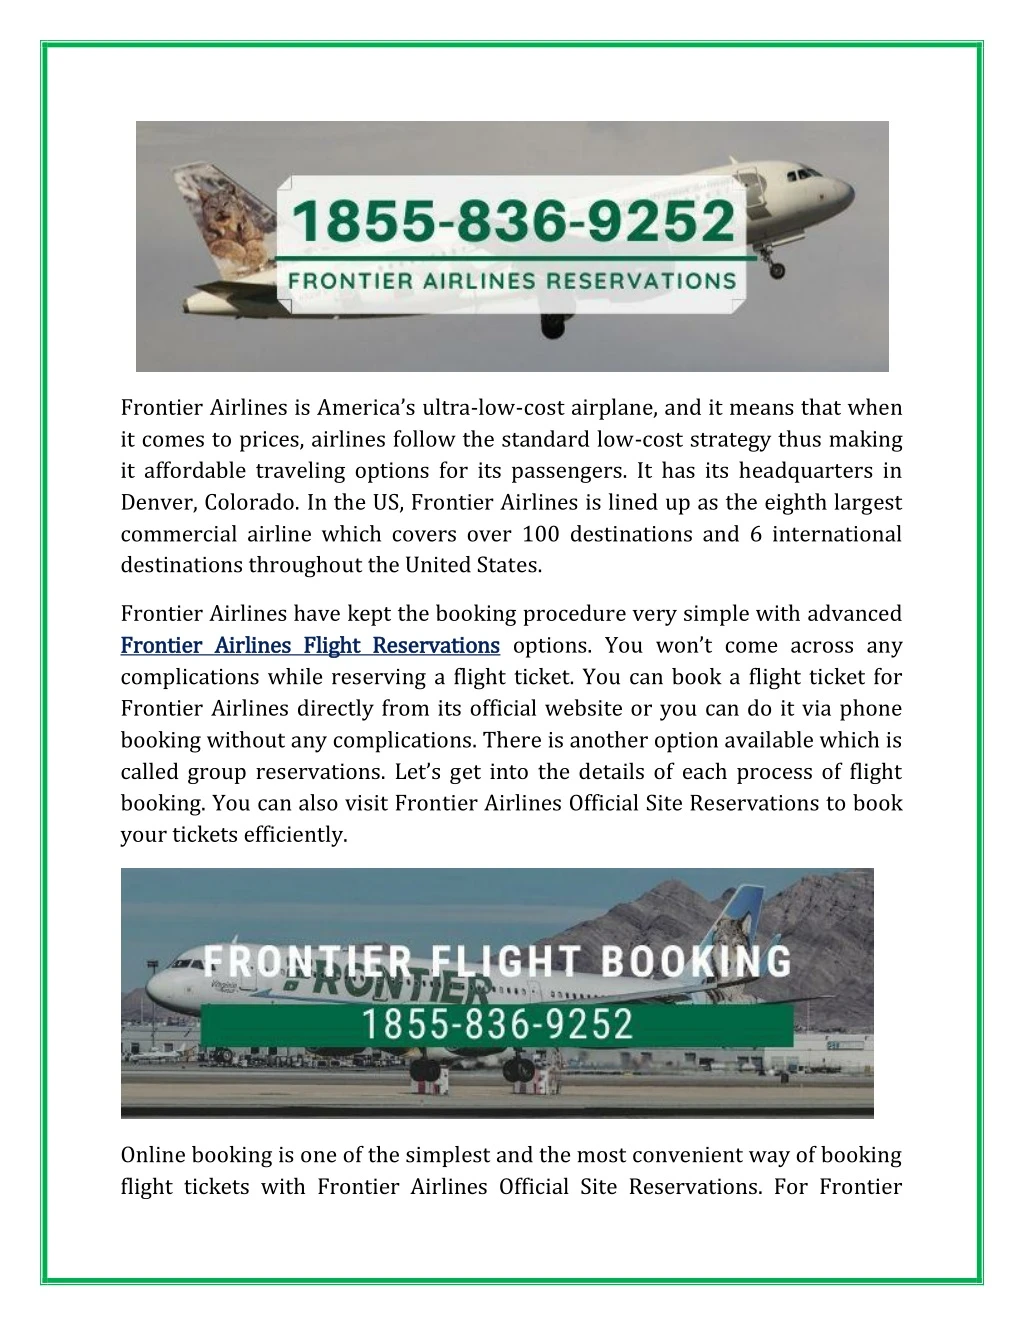 frontier airlines is america s ultra low cost